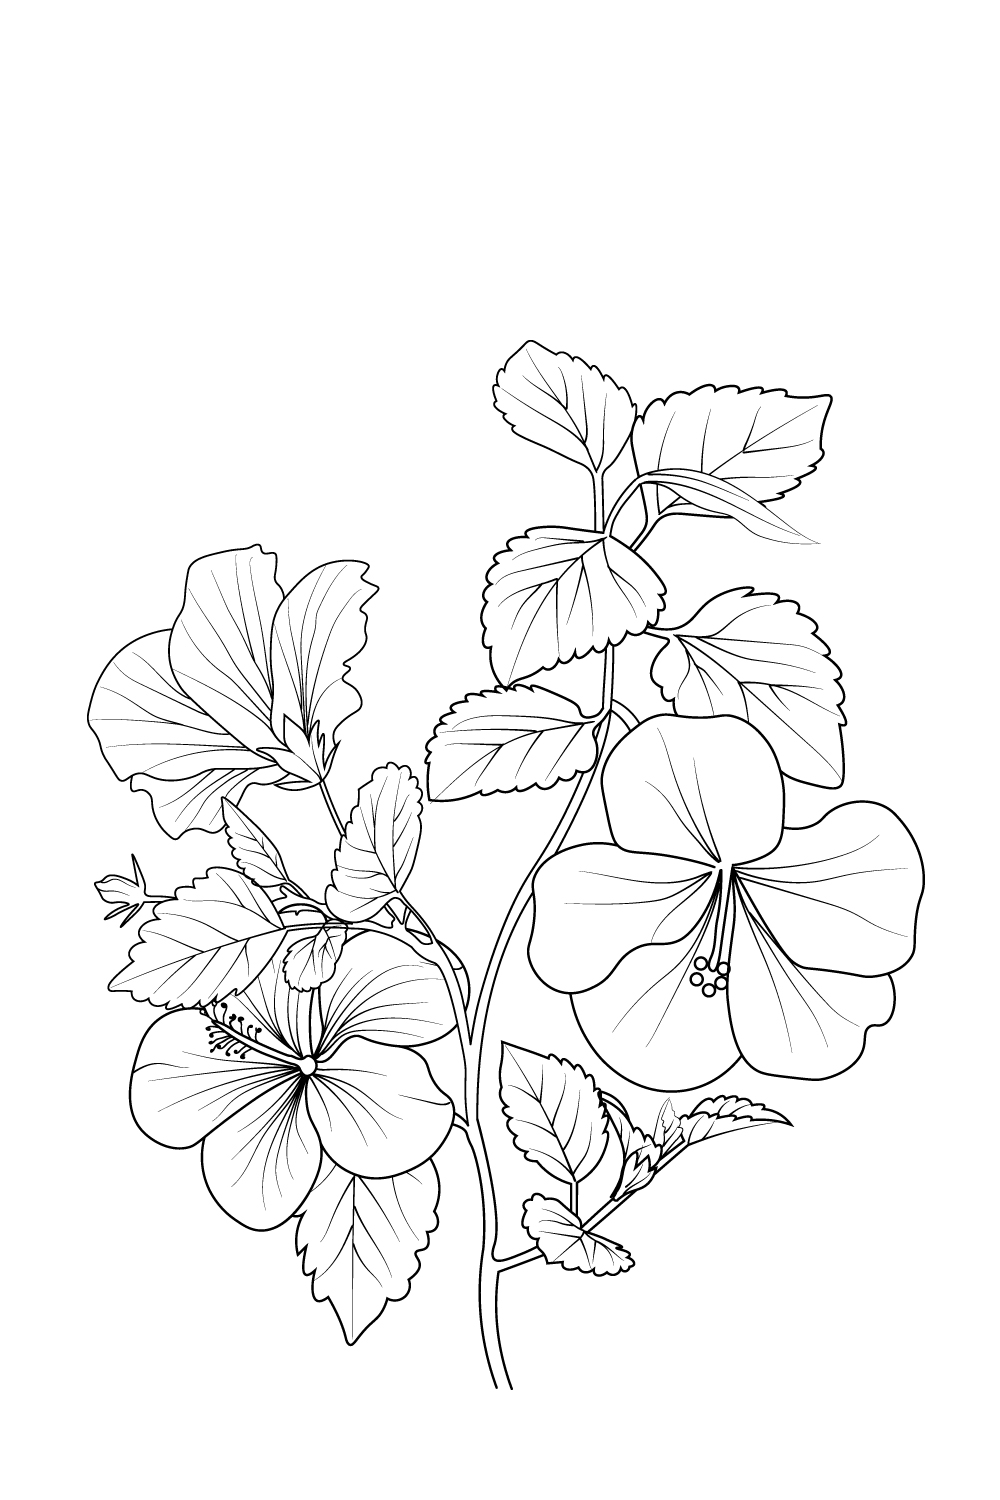 Flower coloring page and books, hand-drawn monochrome vector sketch hibiscus flower, pinterest preview image.